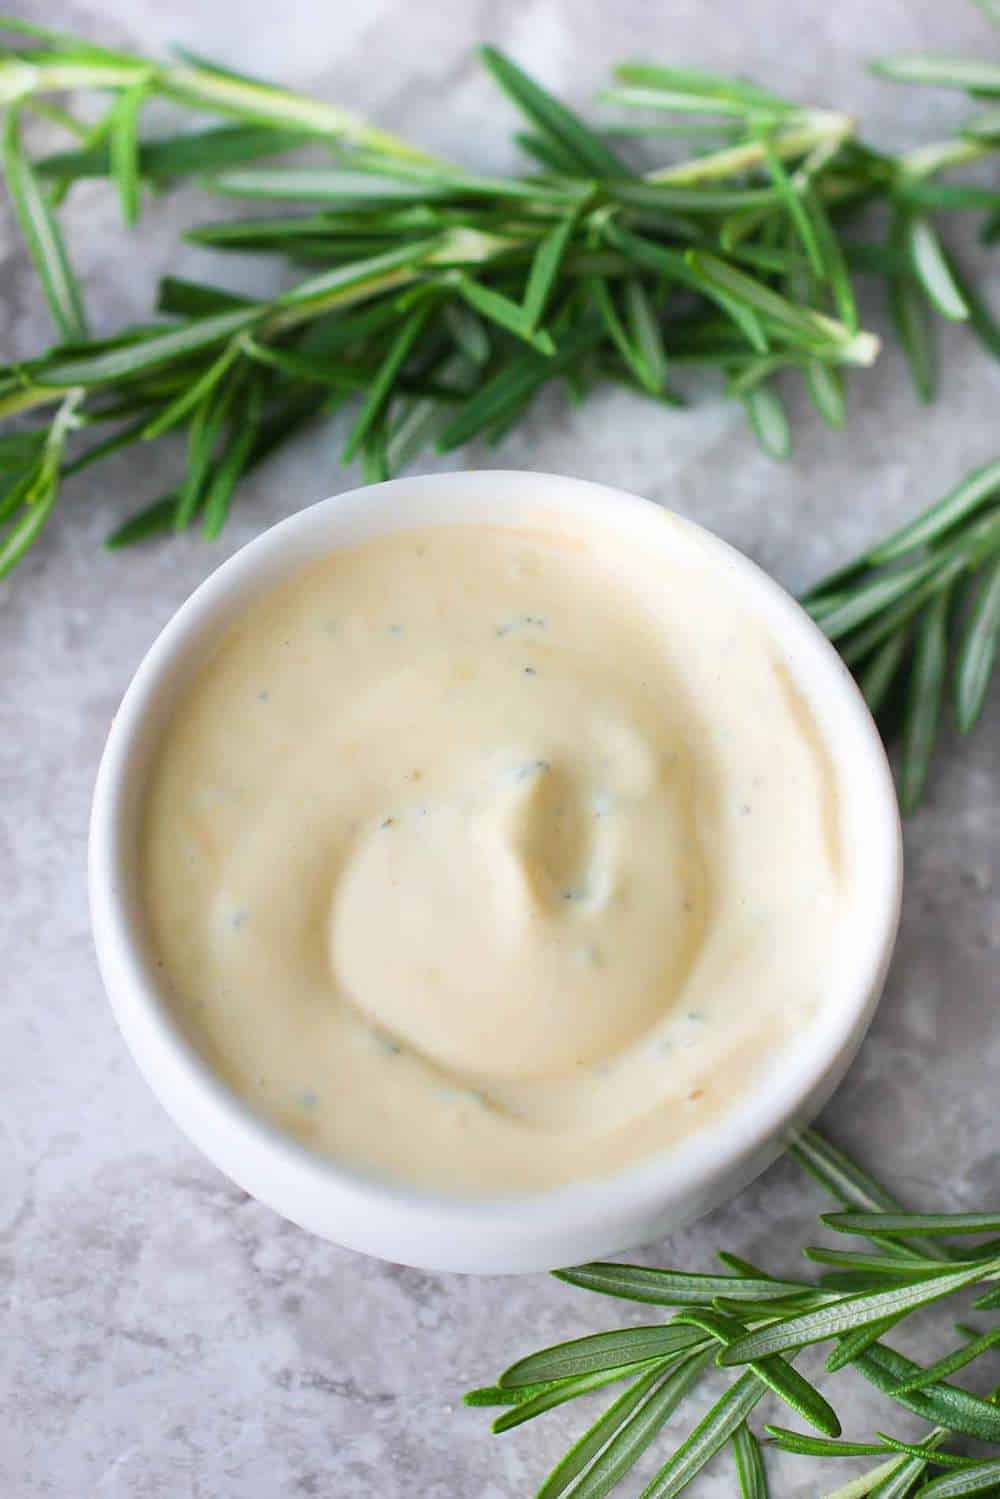 Rosemary And Garlic Aioli Recipe How To Feed A Loon,Call Center Work From Home Philippines